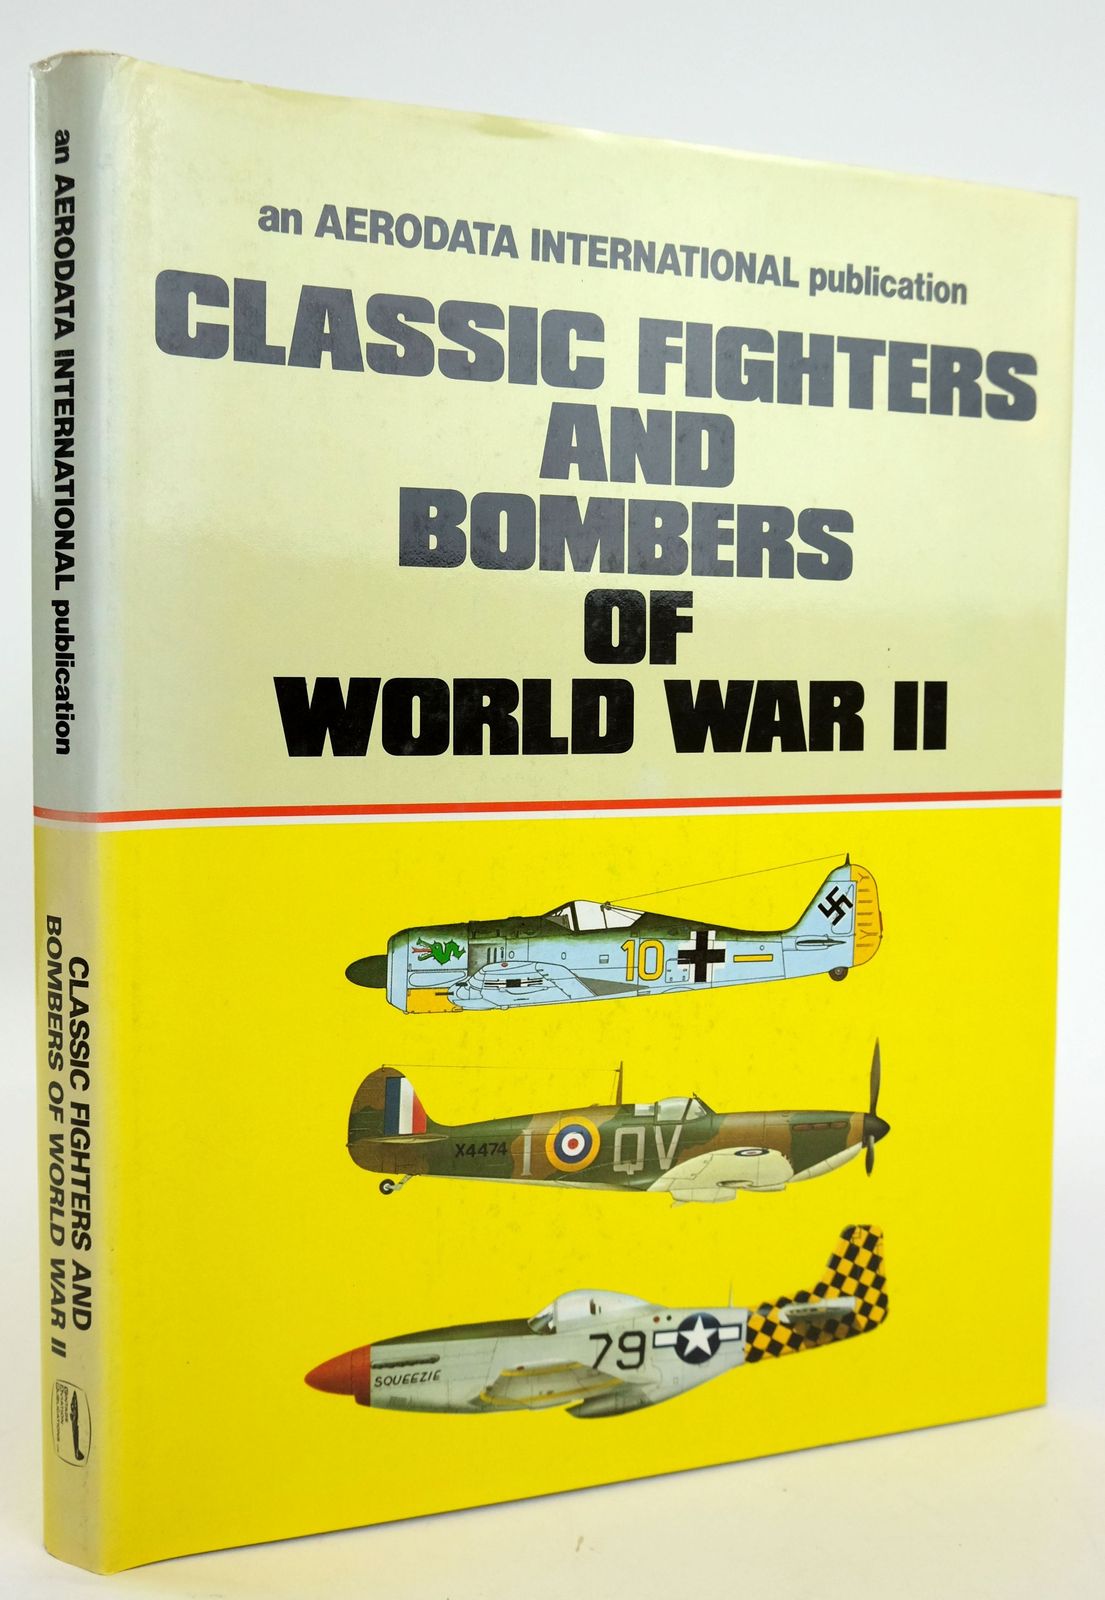 Photo of CLASSIC FIGHTERS AND BOMBERS OF WORLD WAR II written by Cooksley, Peter G. et al, published by Aerodata International (STOCK CODE: 1820142)  for sale by Stella & Rose's Books